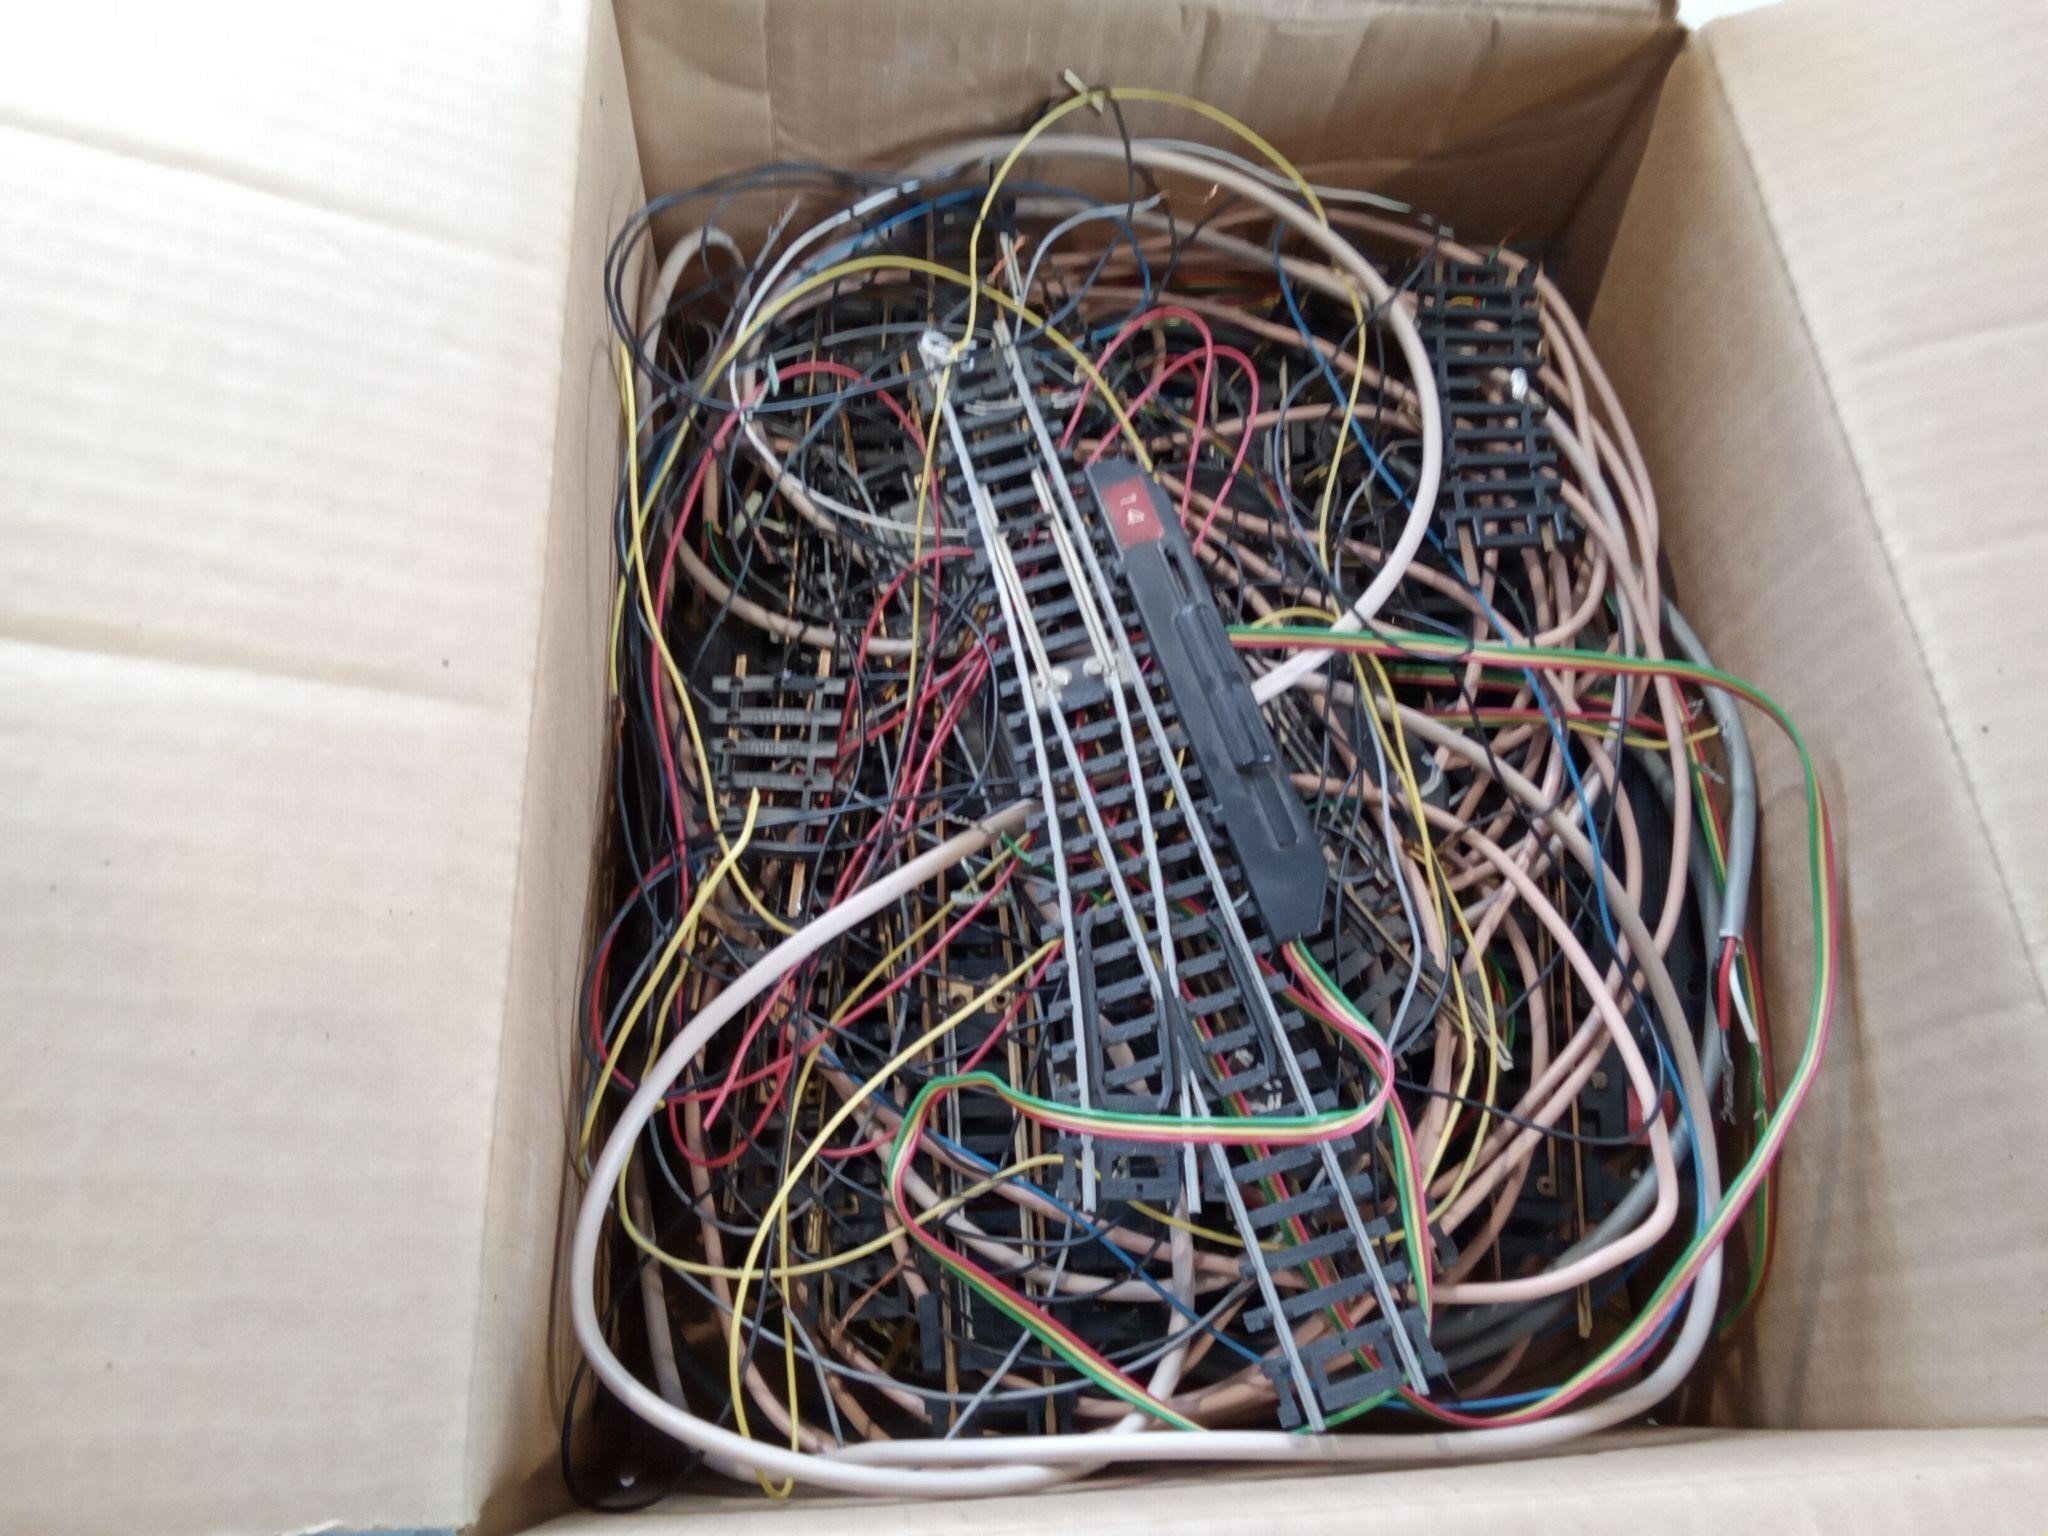 Lot of Wires, Cut off, Switches, Power Track Piece